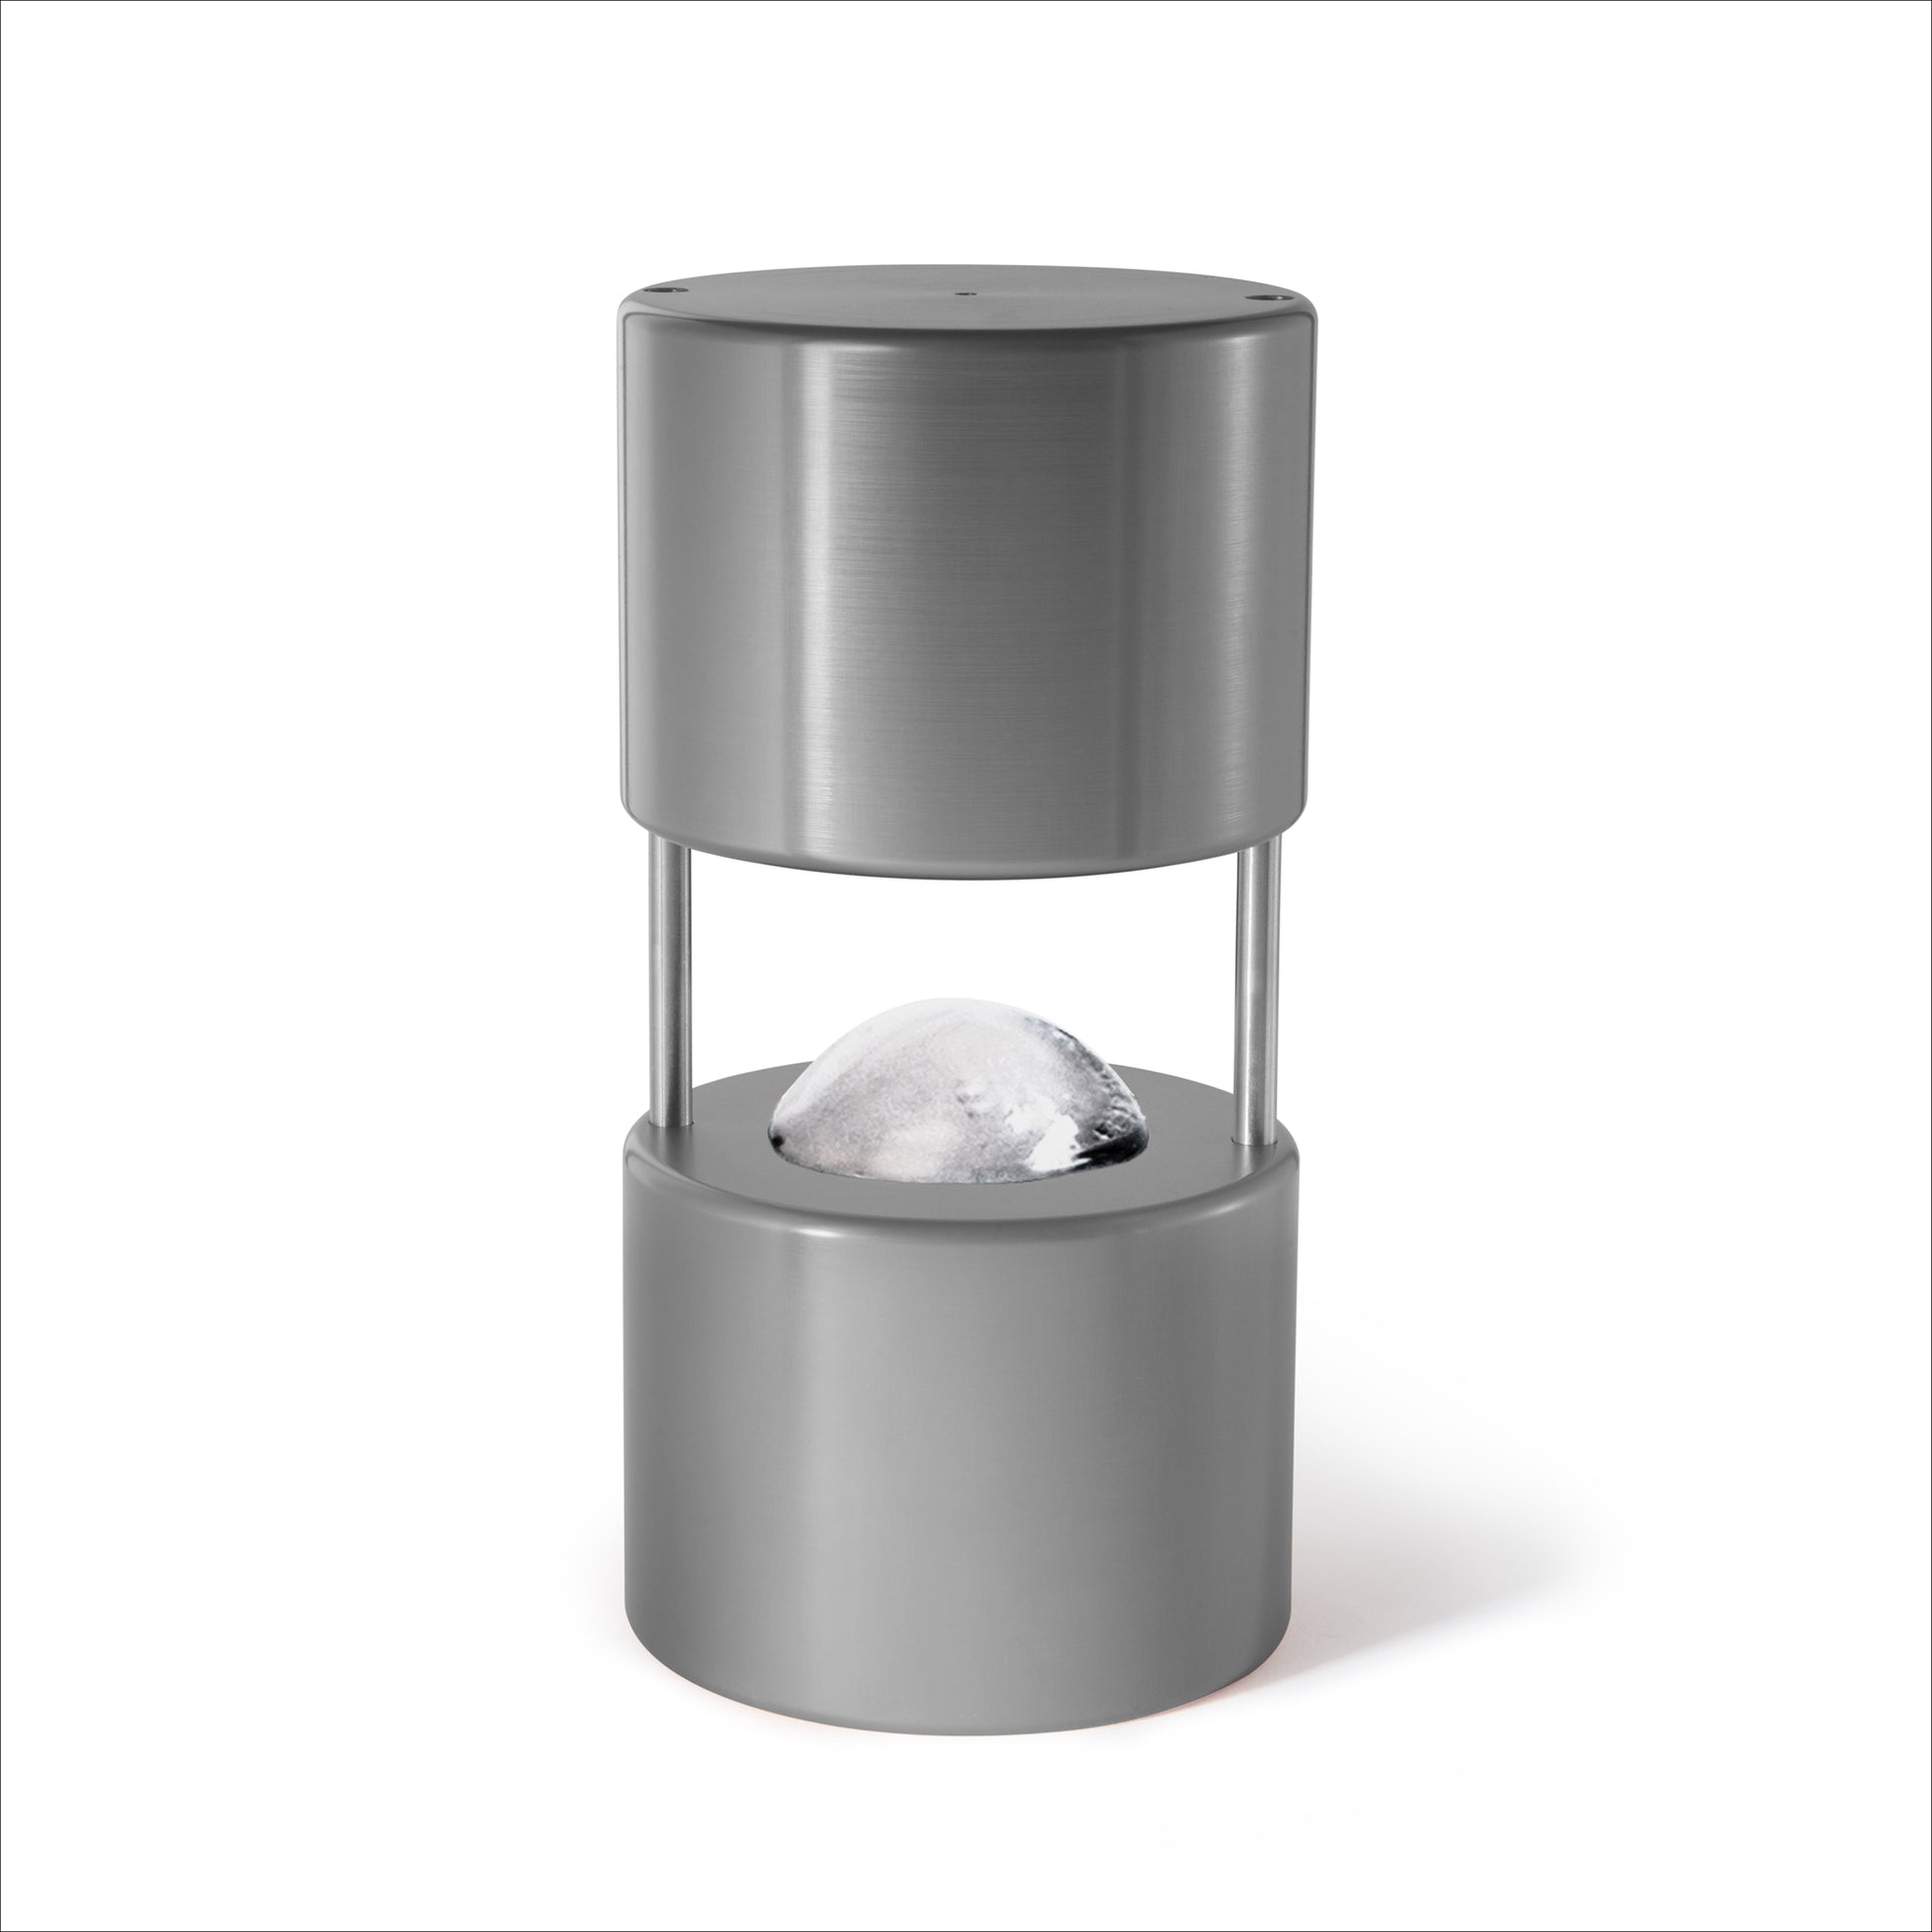 ICE BALL PRESS For Perfect Cocktails. creating crystal-clear BALLS 55mm.  your home bar., Silver